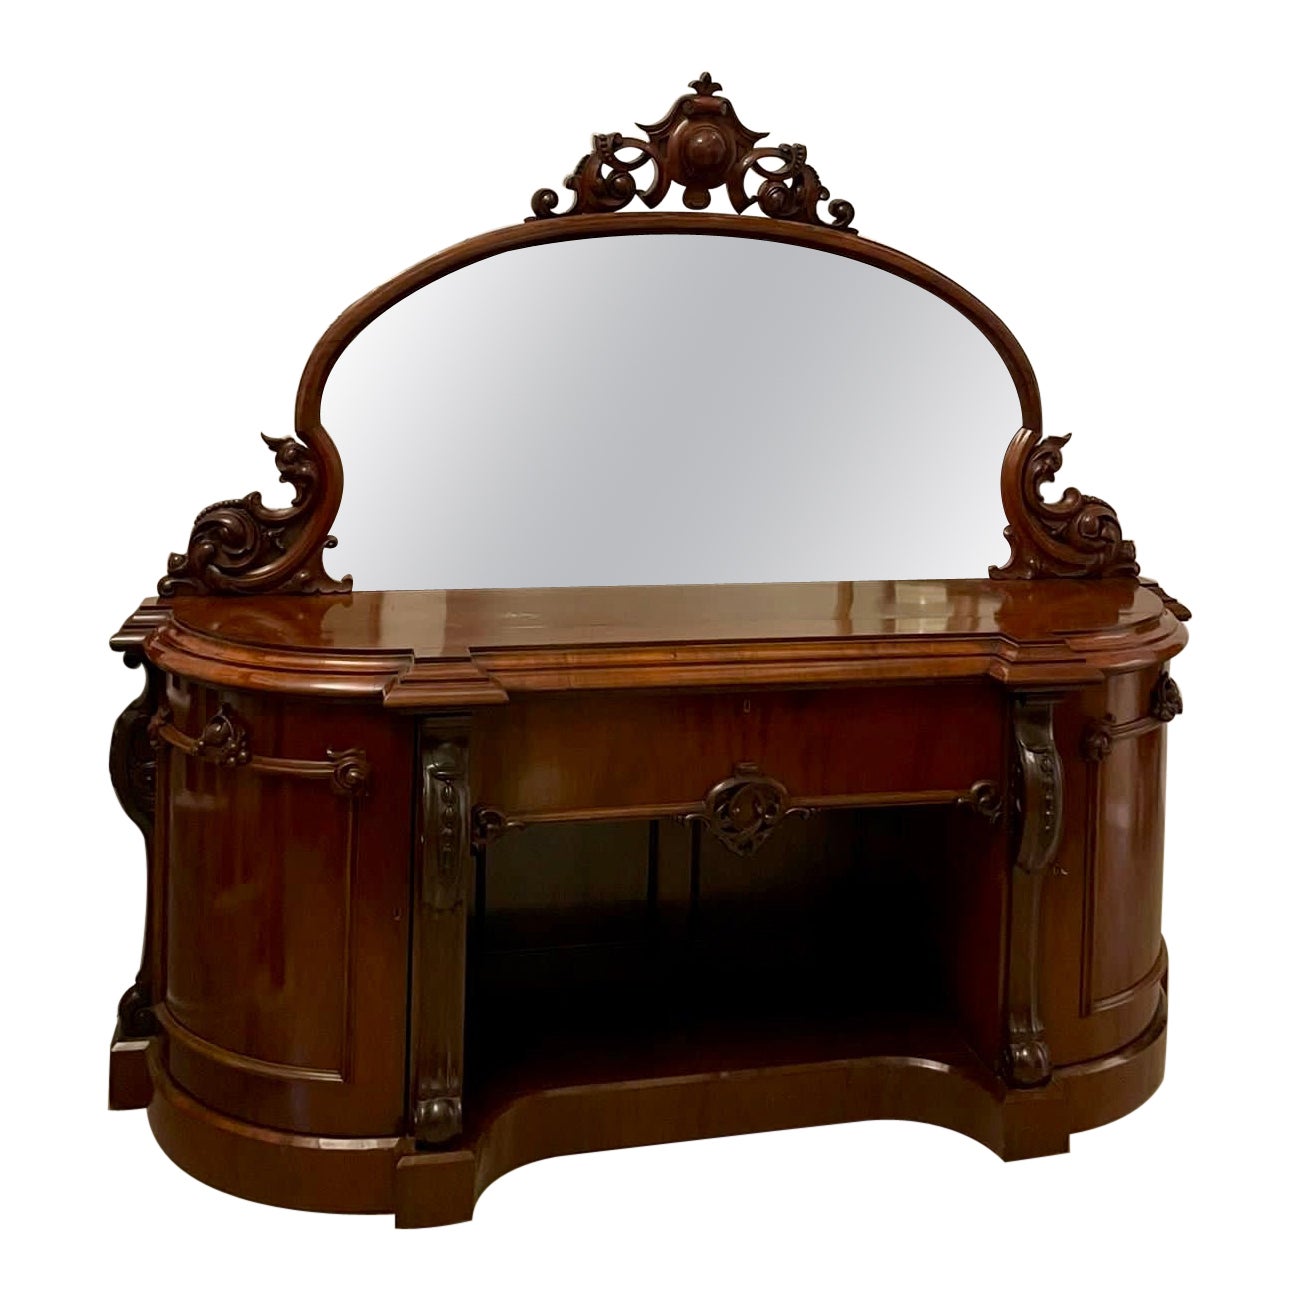 Outstanding Quality Antique Victorian Carved Mahogany Mirror Back Sideboard 